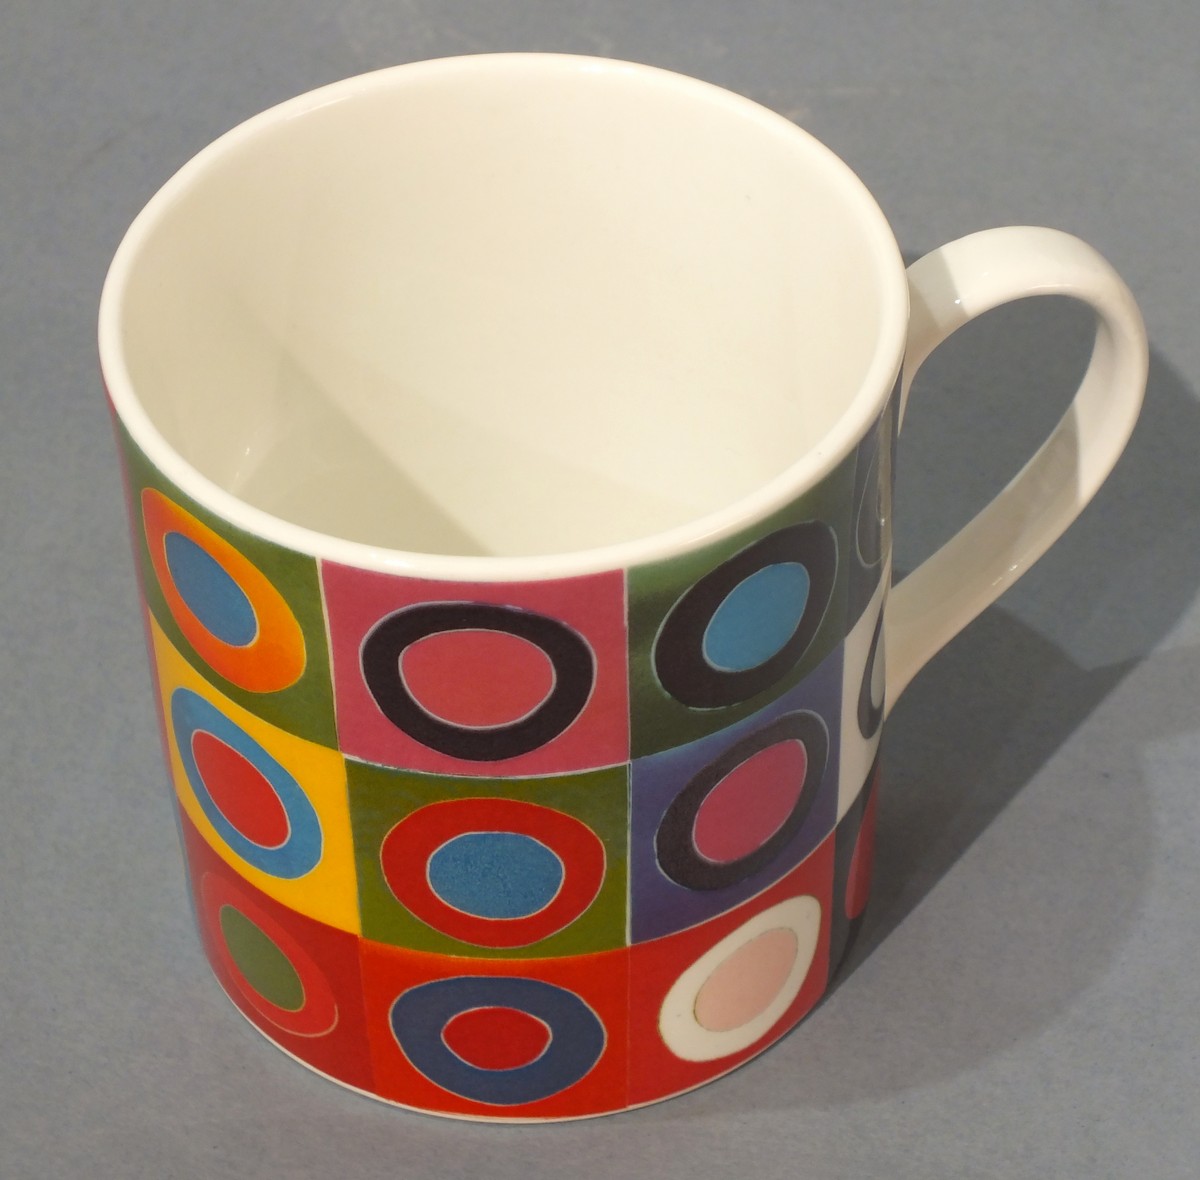 Sir Terry FROST (British 1915-2003) Orchard Tambourine Mug (on behalf of Royal Academy of Arts), - Image 6 of 10